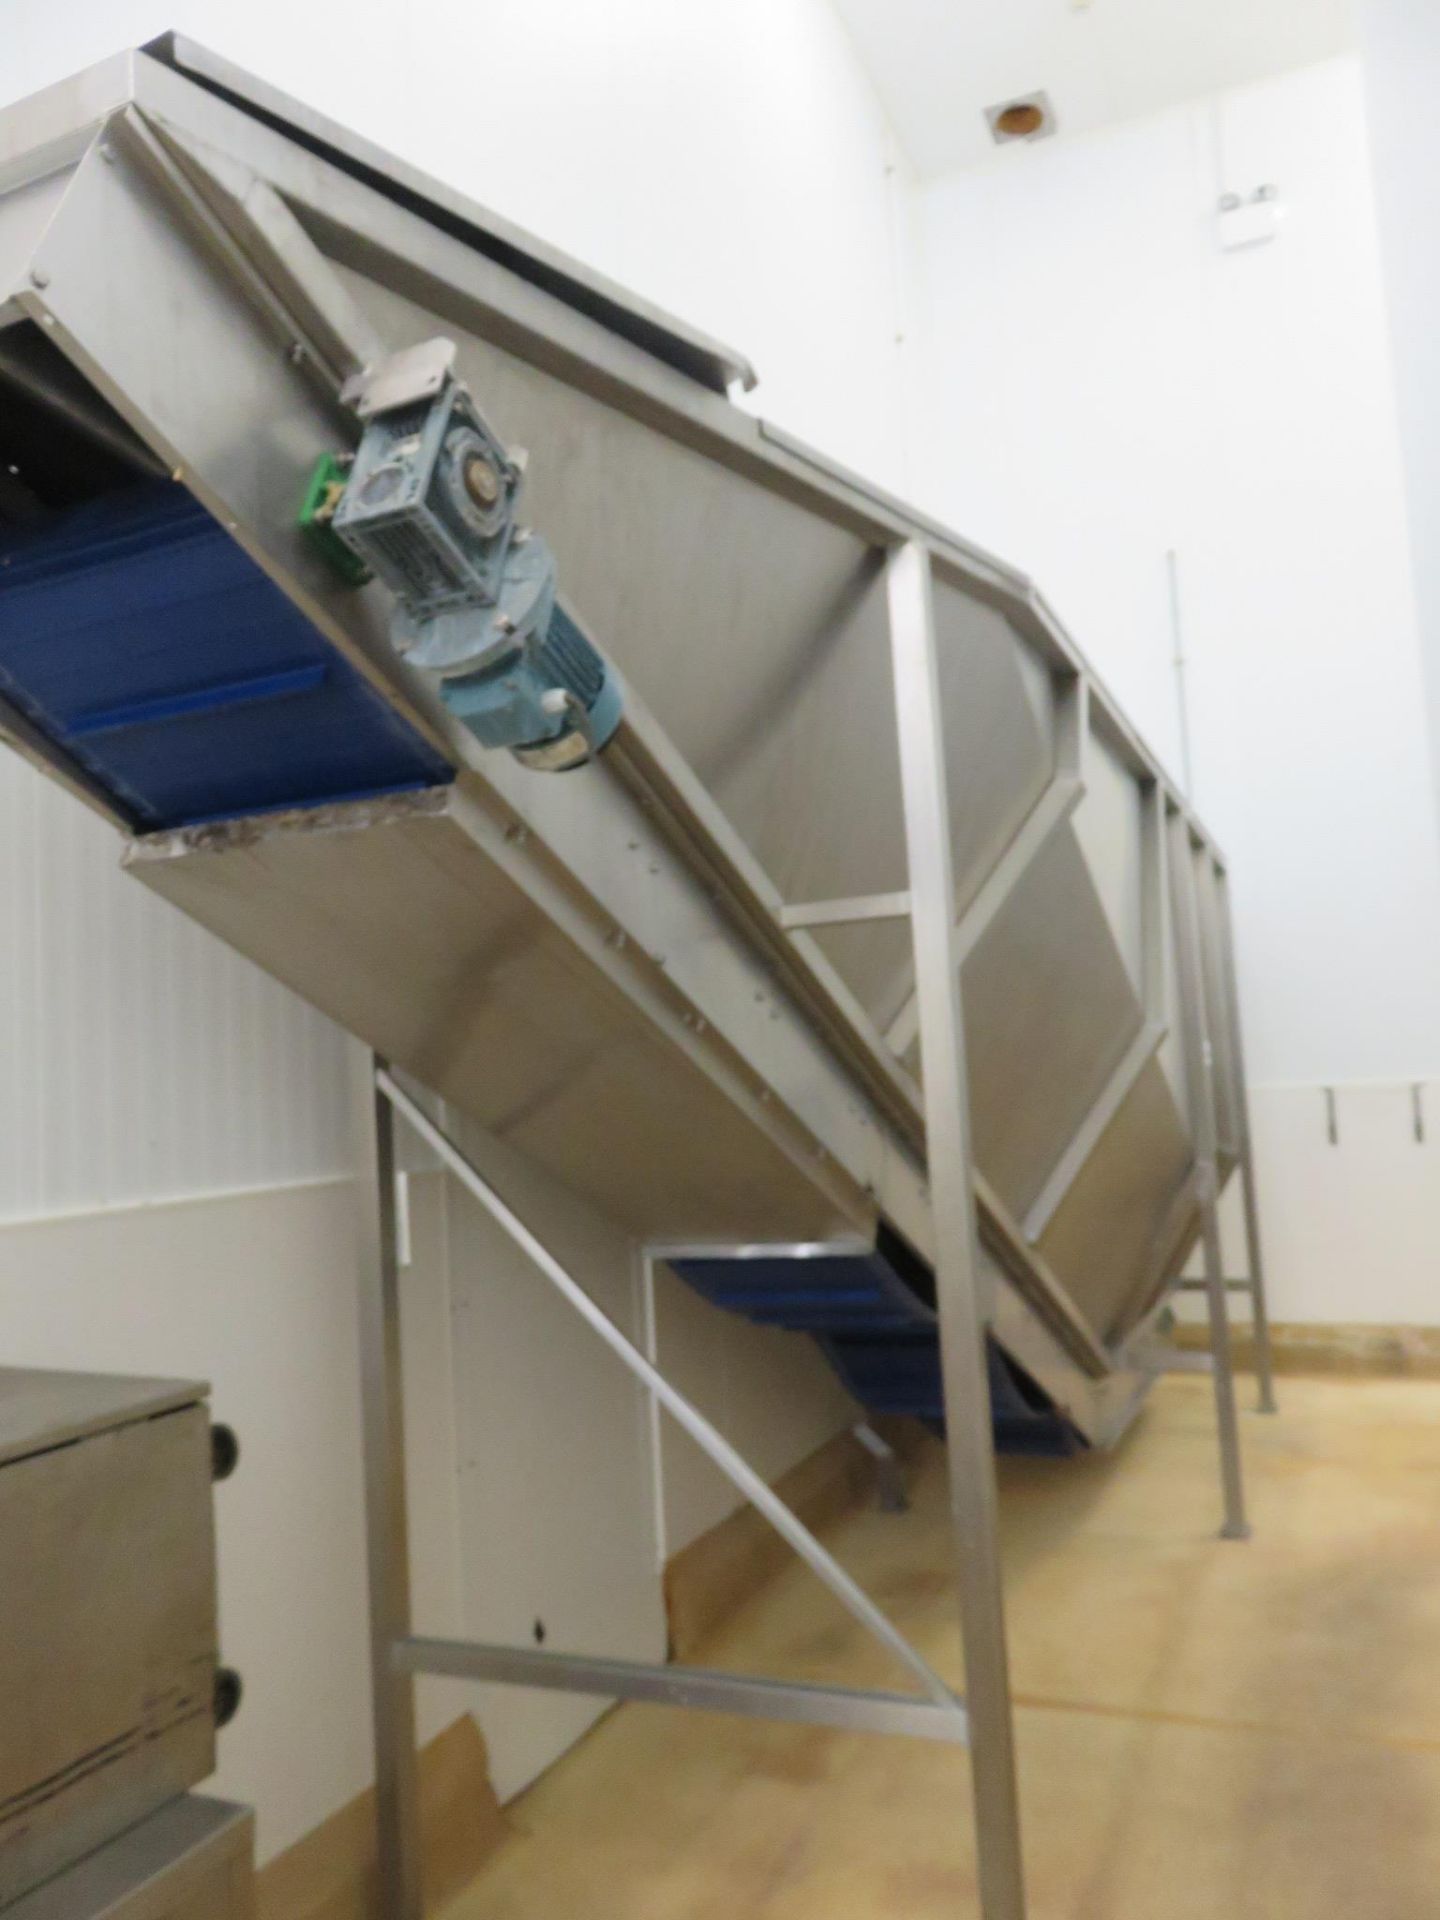 S/S INCLINE FLIGHTED BELT CONVEYOR WITH HOPPER. - Image 3 of 6